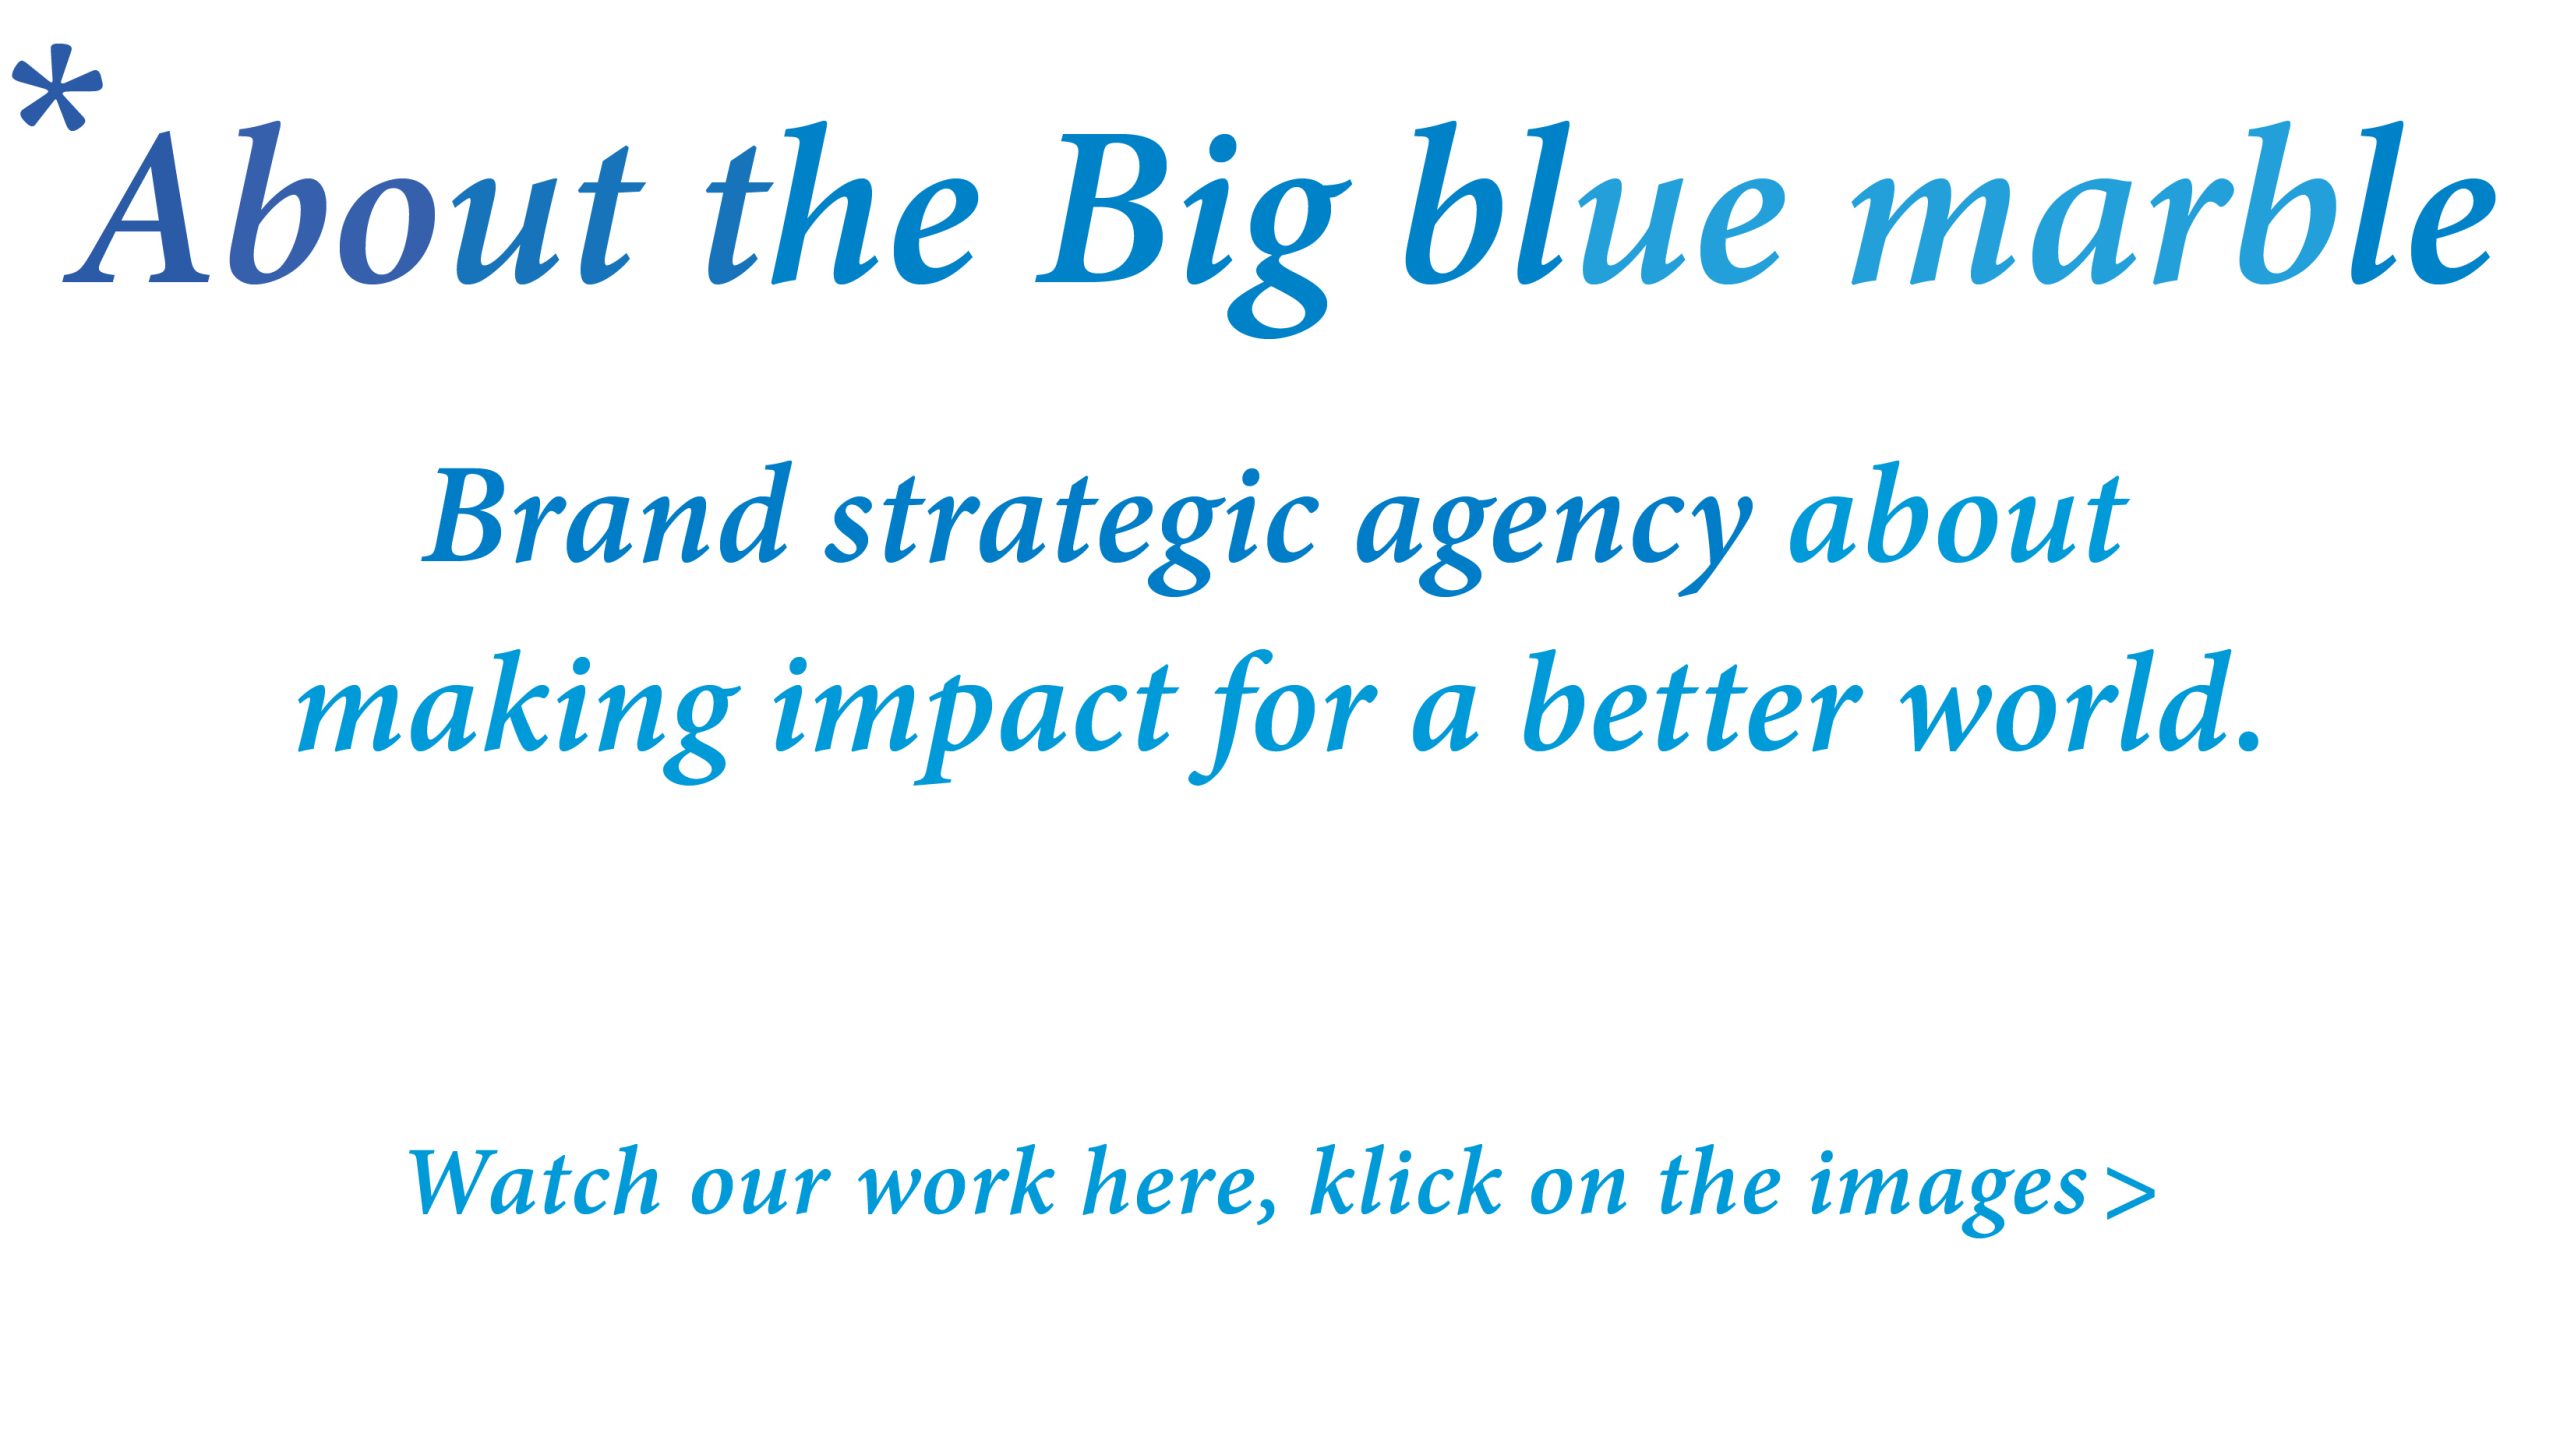 *About the big blue marble Home page Tekst - Website kopie